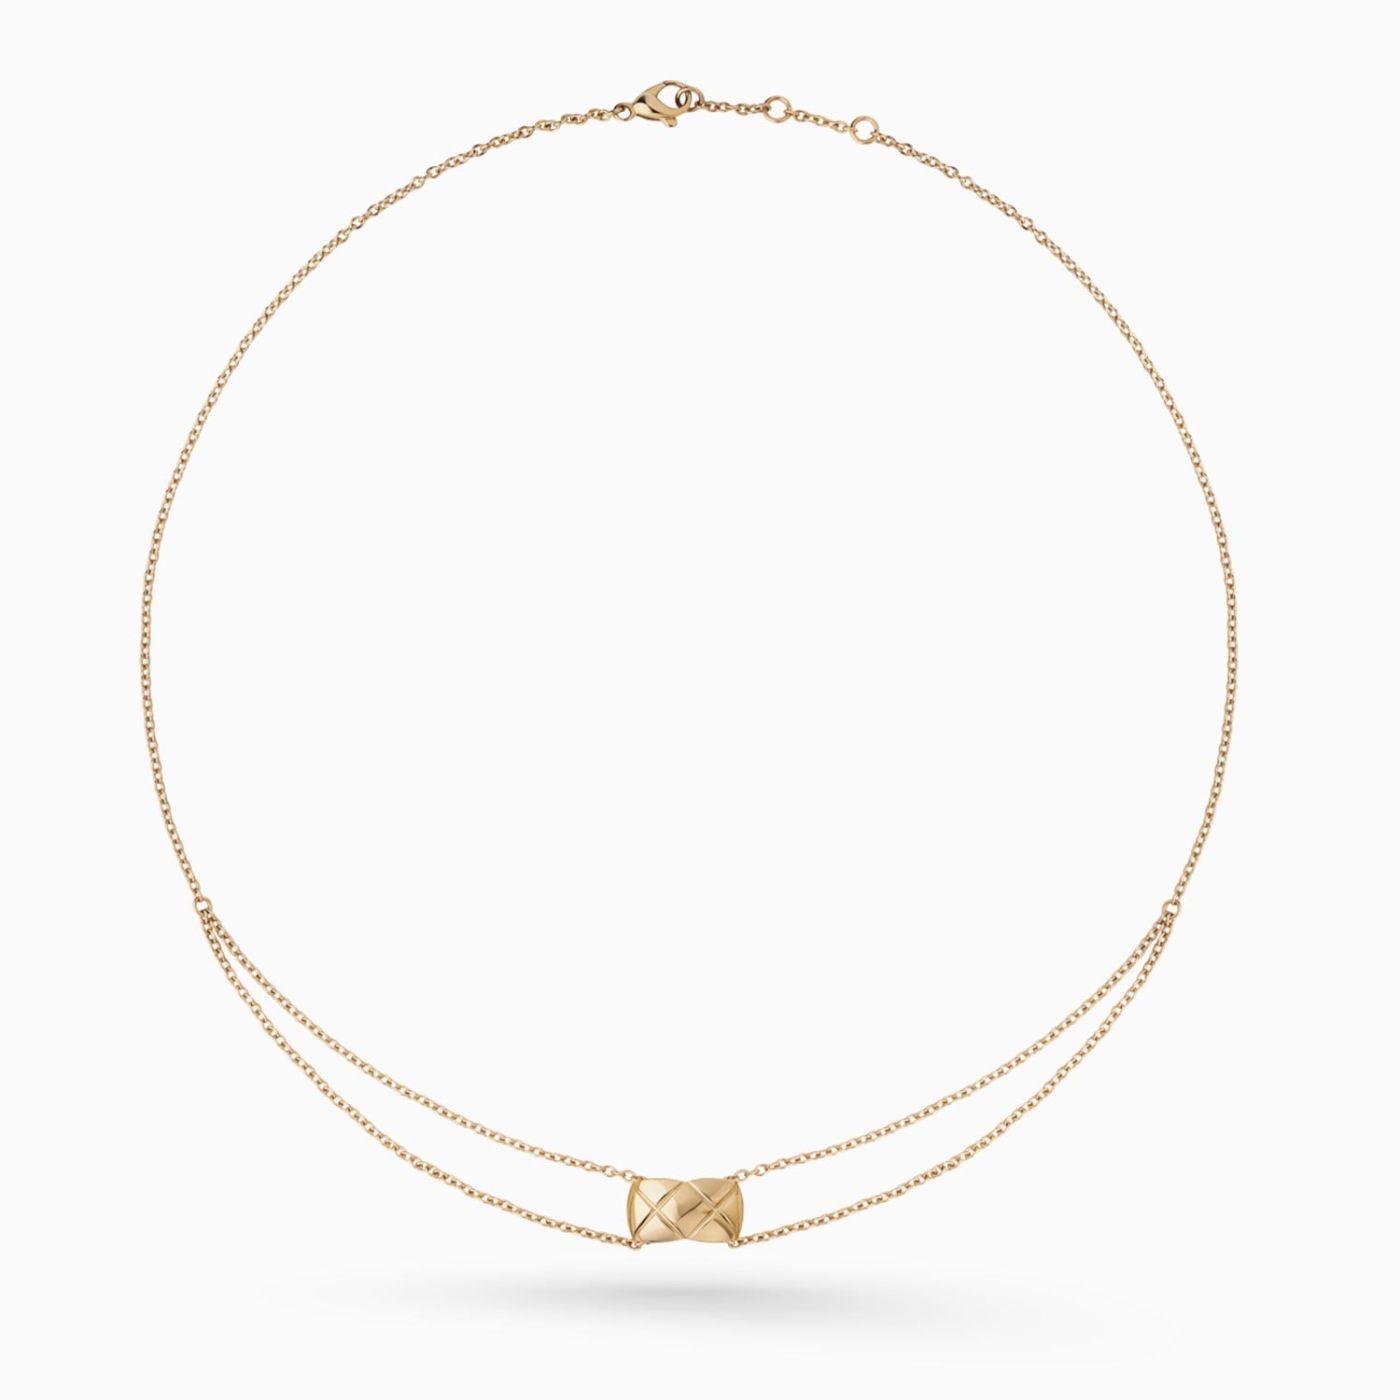 Necklace CHANEL Coco Crush beige gold 